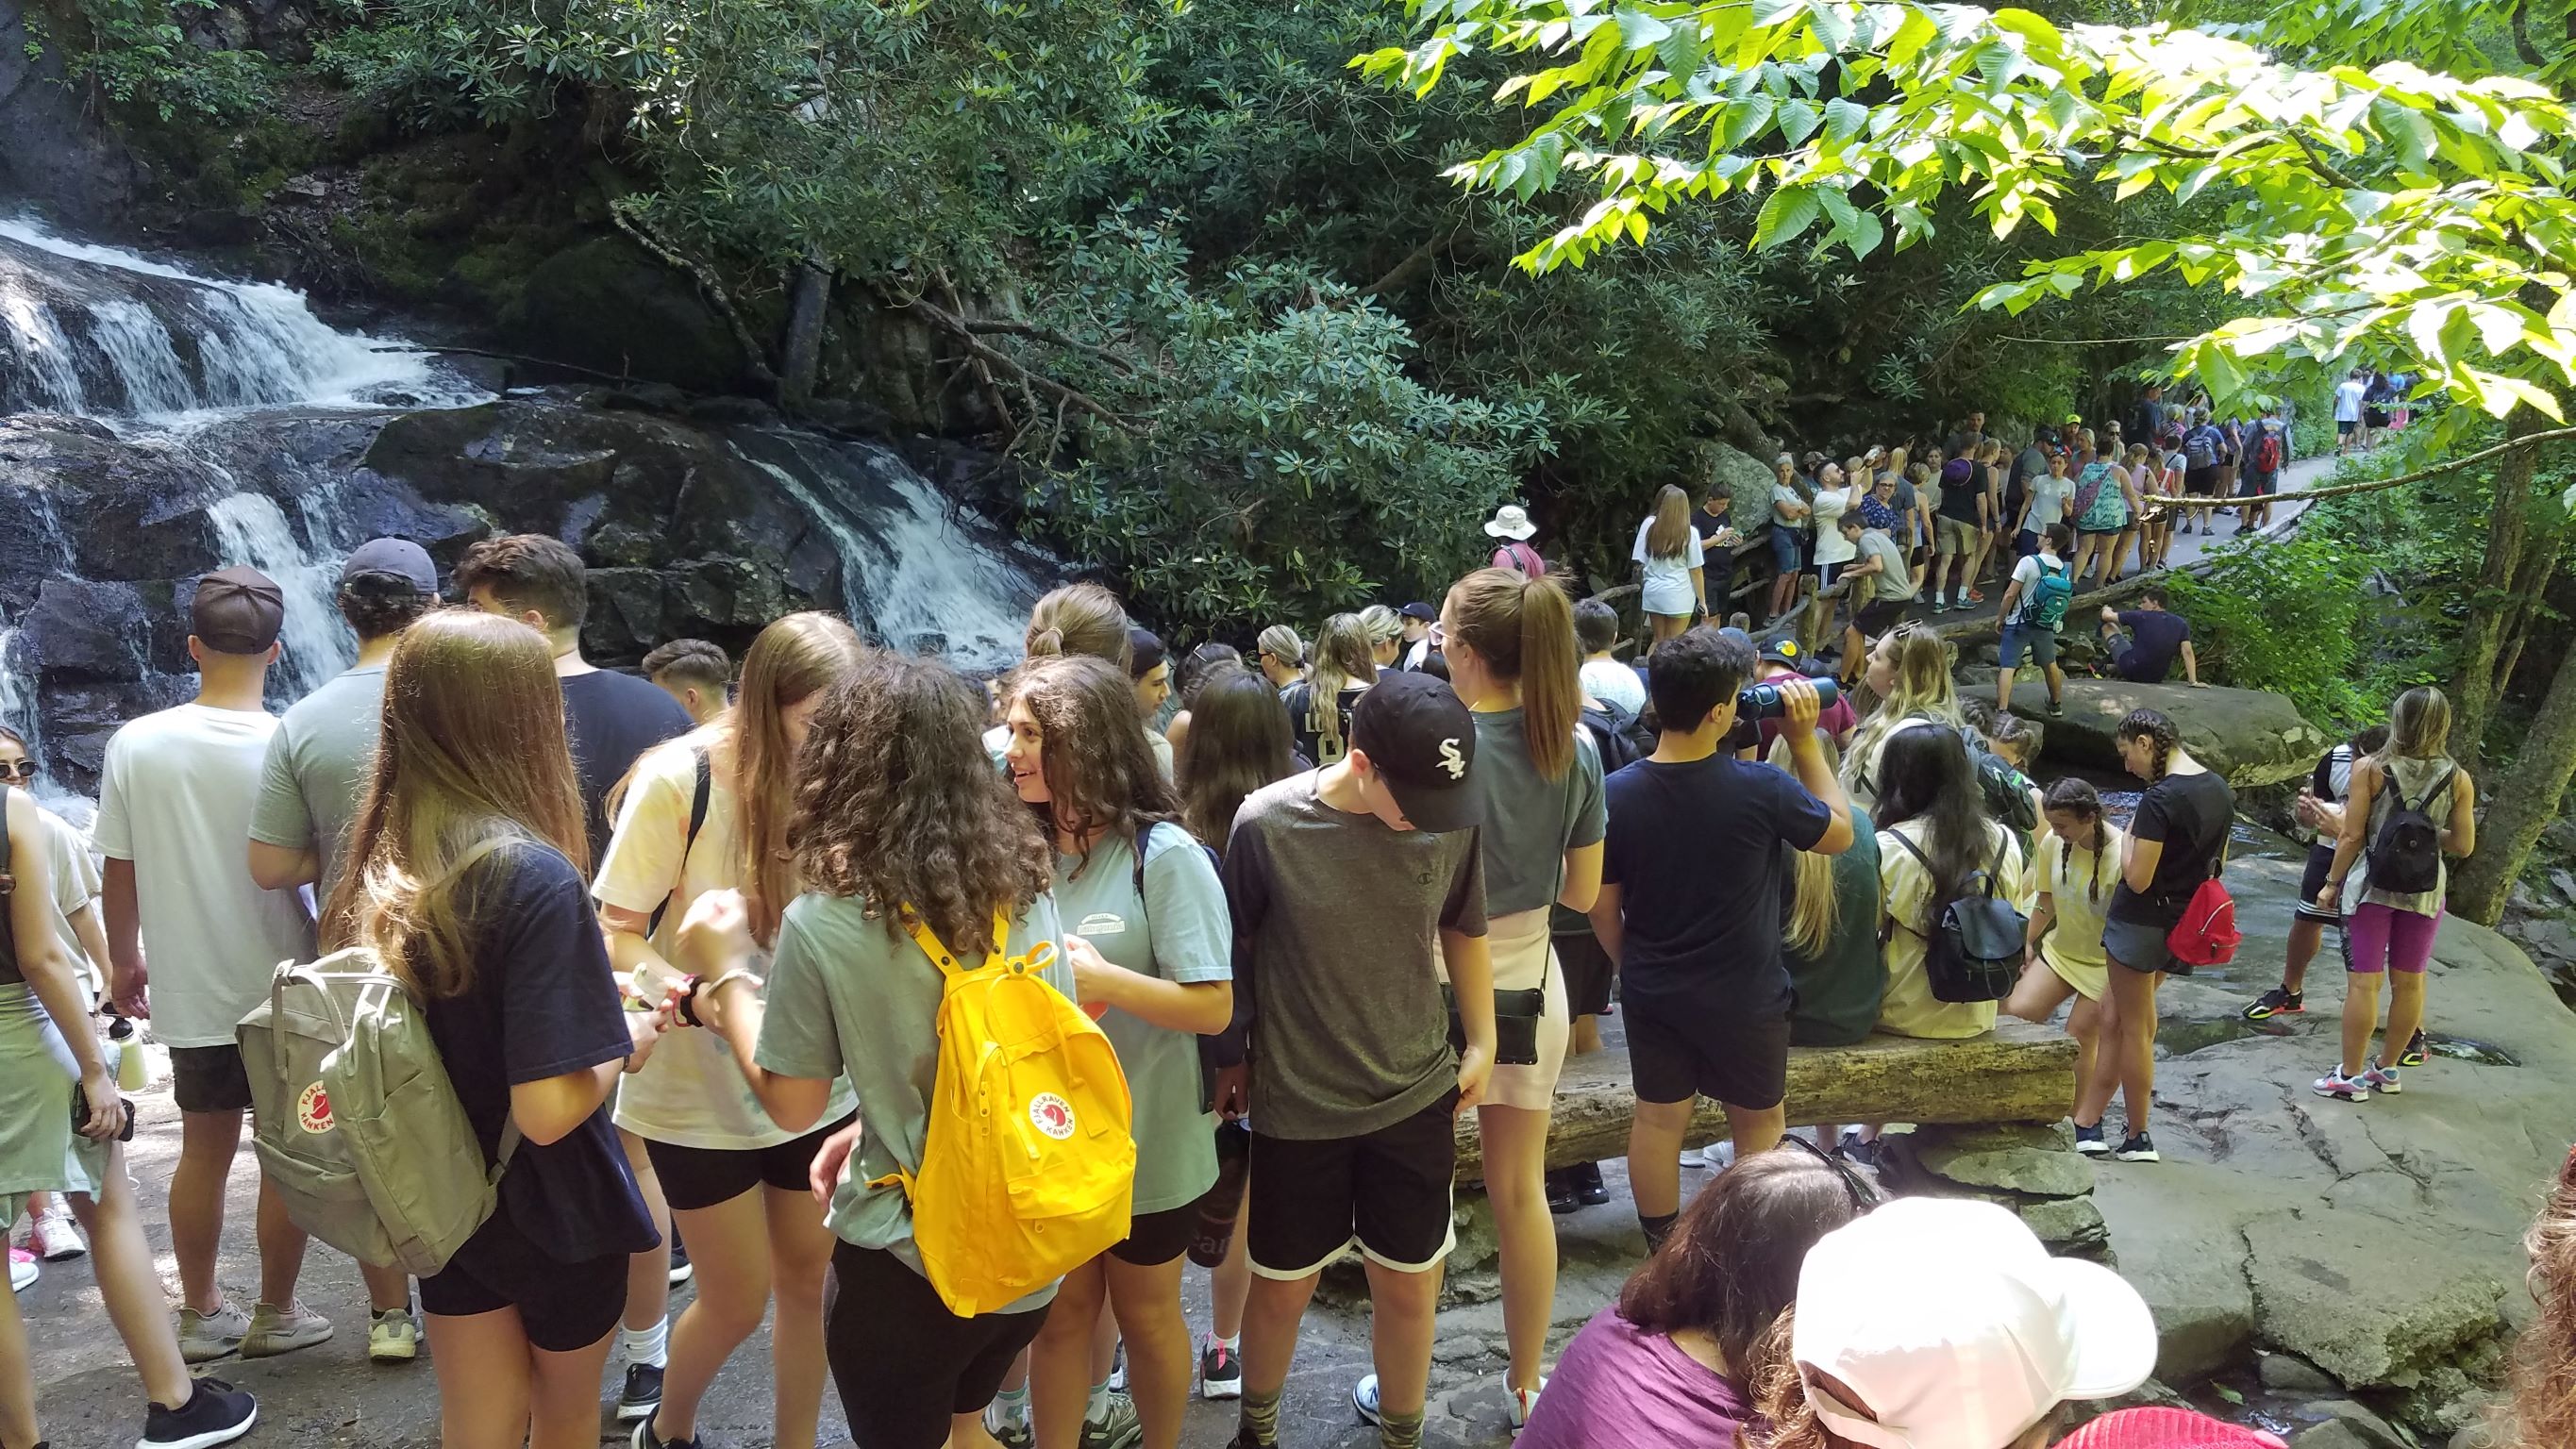 A large crowd of people of varying ages lining a trail and surrounding a waterfall.